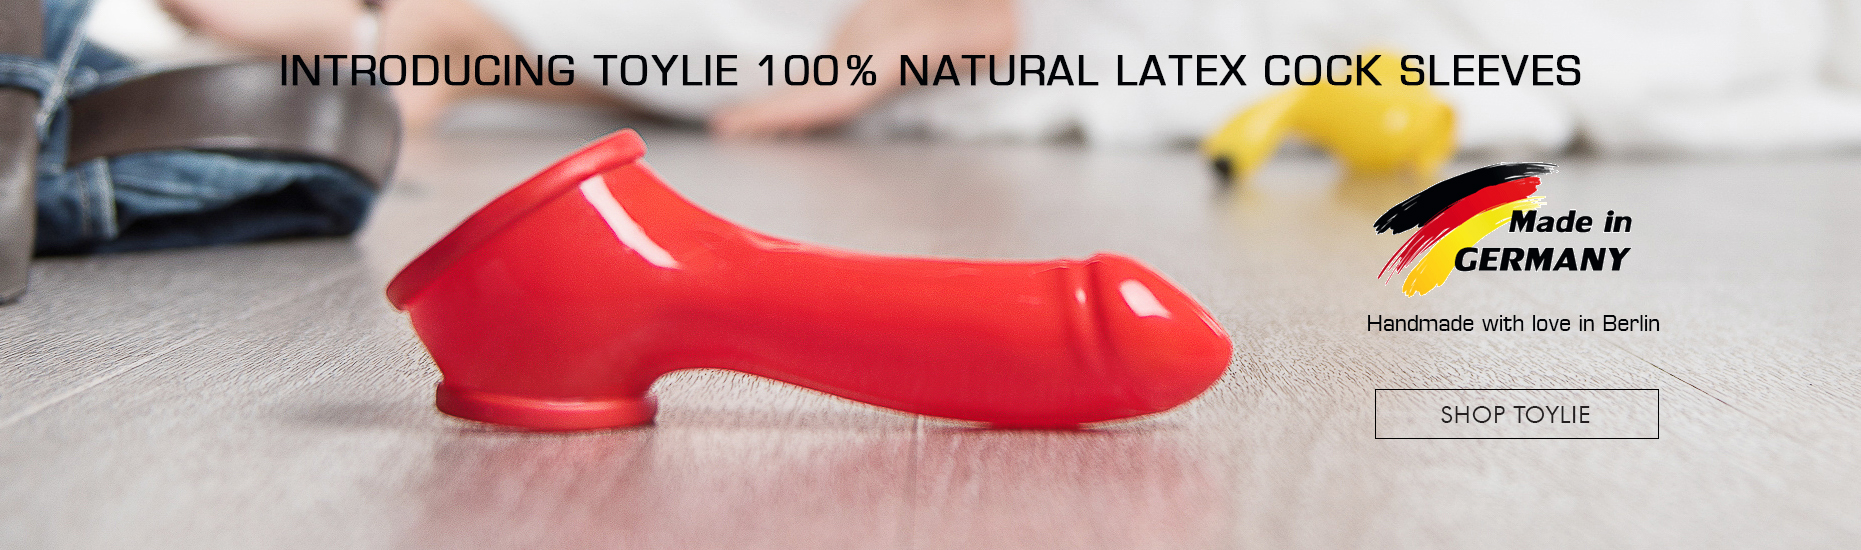 INTRODUCING TOYLIE 100% NATURAL LATEX COCK SLEEVES